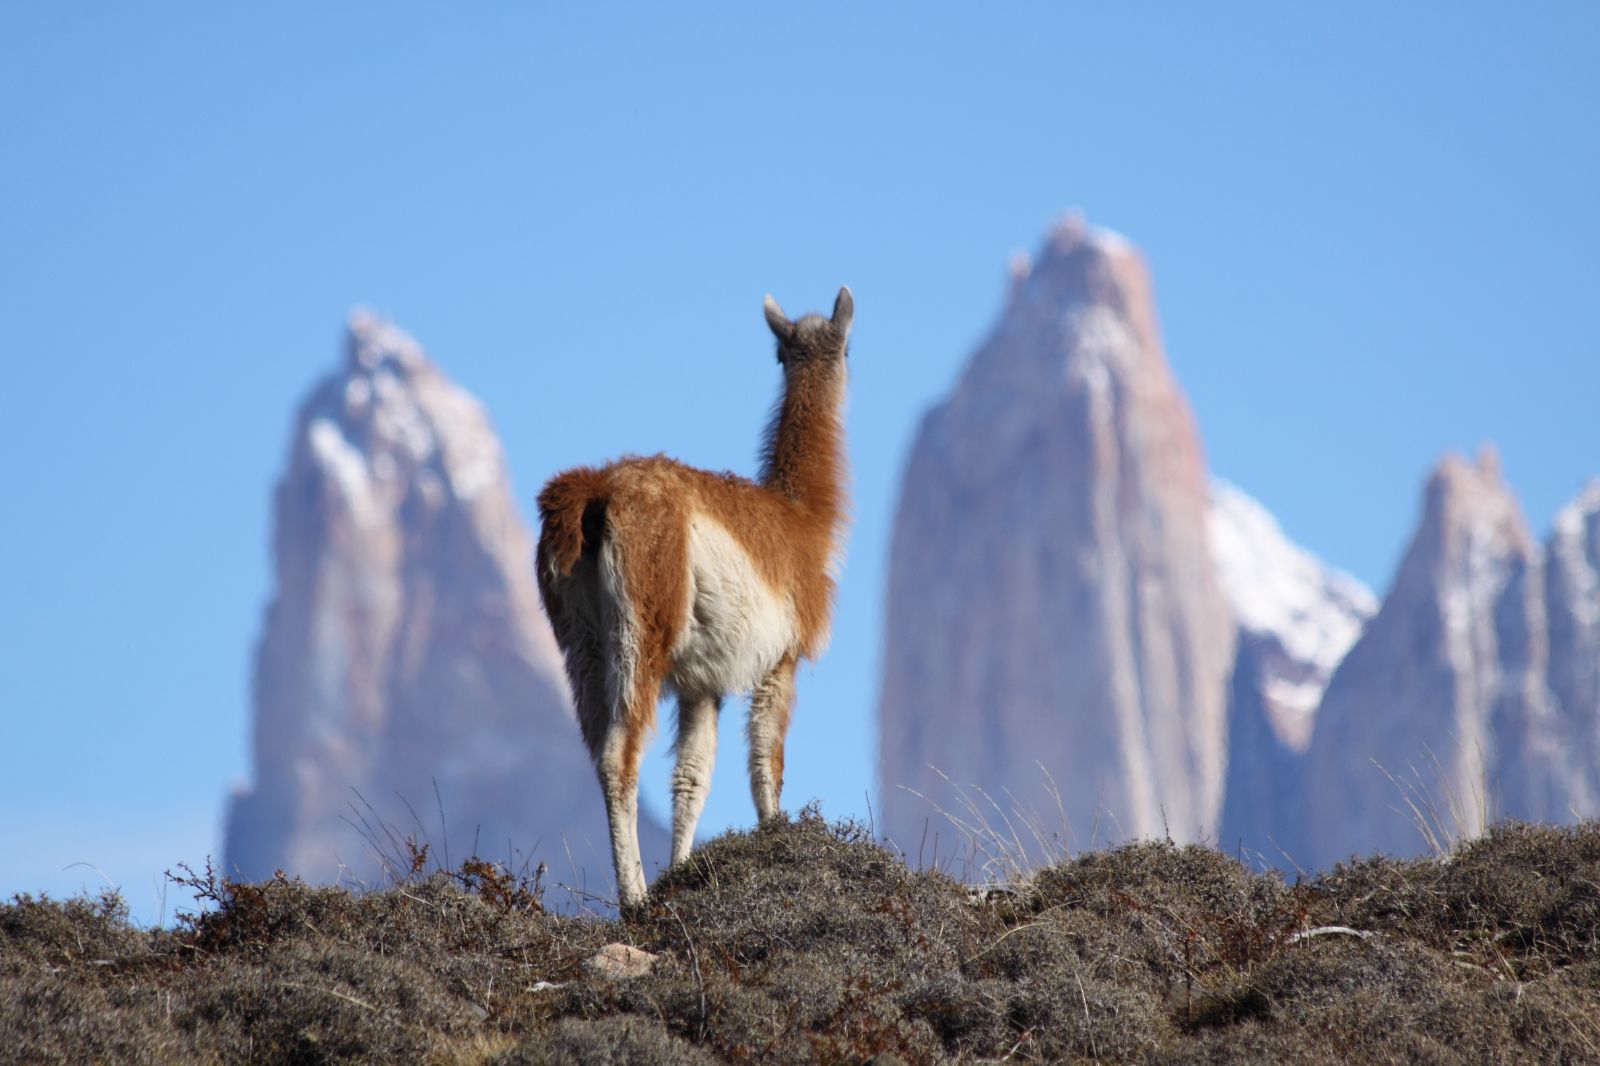 A vicuna spotted on the grounds of Awasi Patagonia